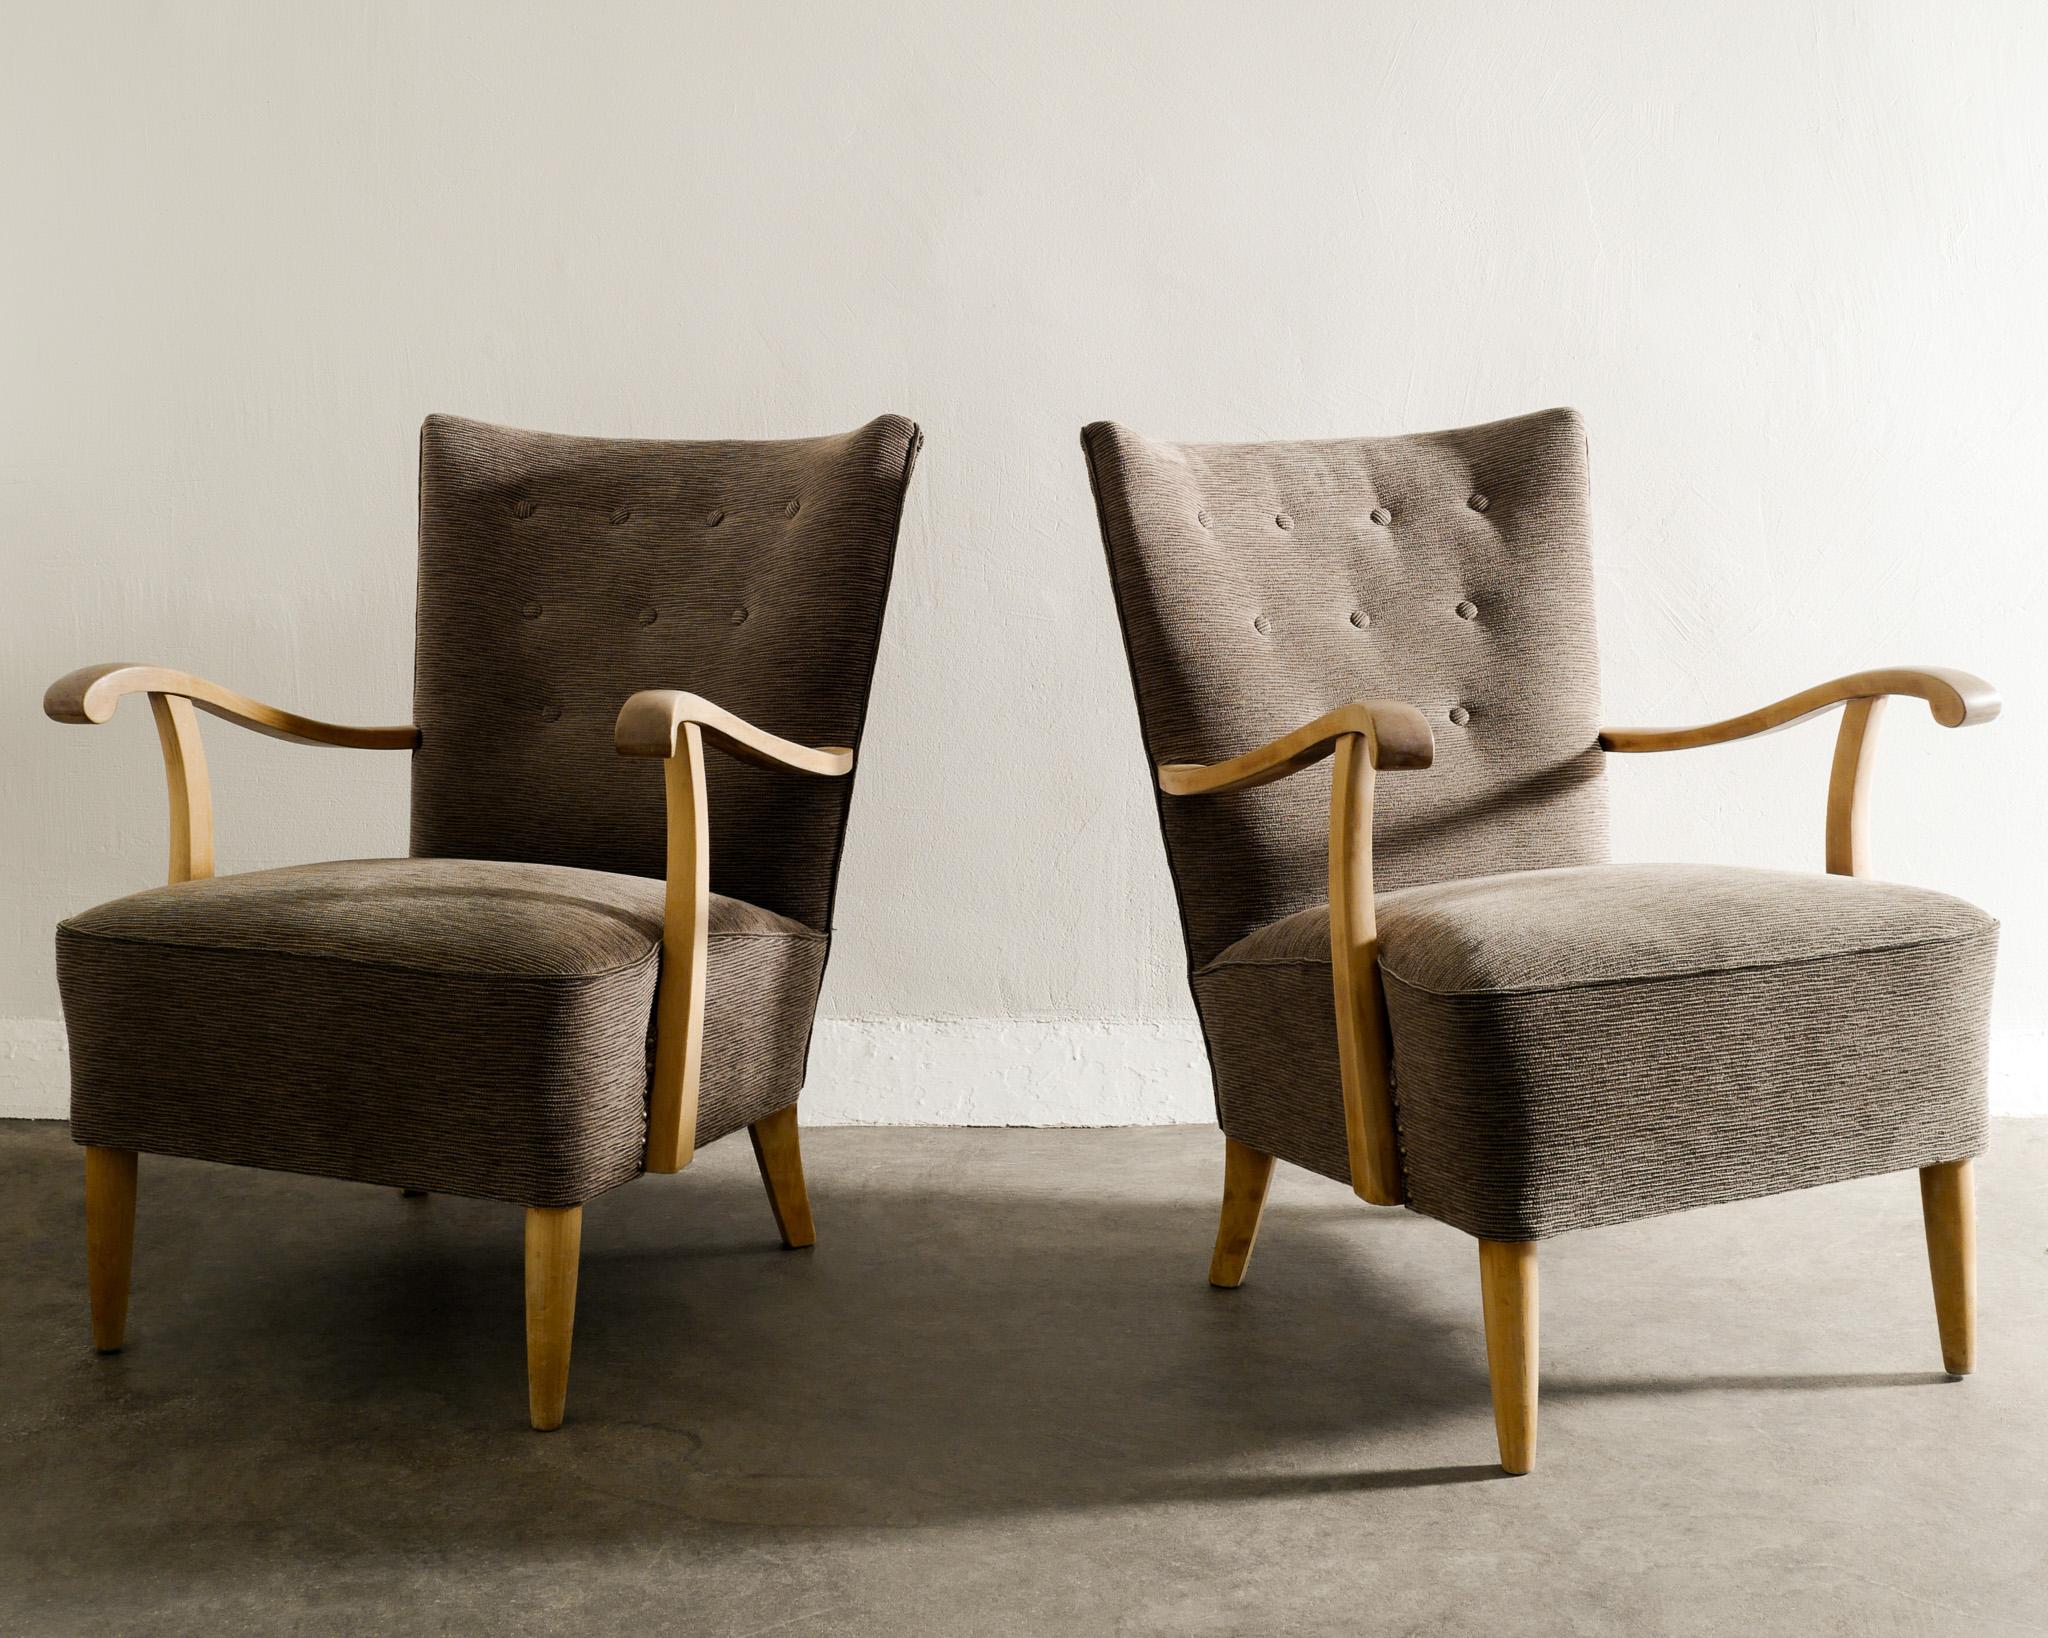 Rare pair of mid century Swedish modern armchairs in beech and newly upholstered brown / gray striped wool fabric. In good matching condition. 

Dimensions: H: 85 cm / 33.5